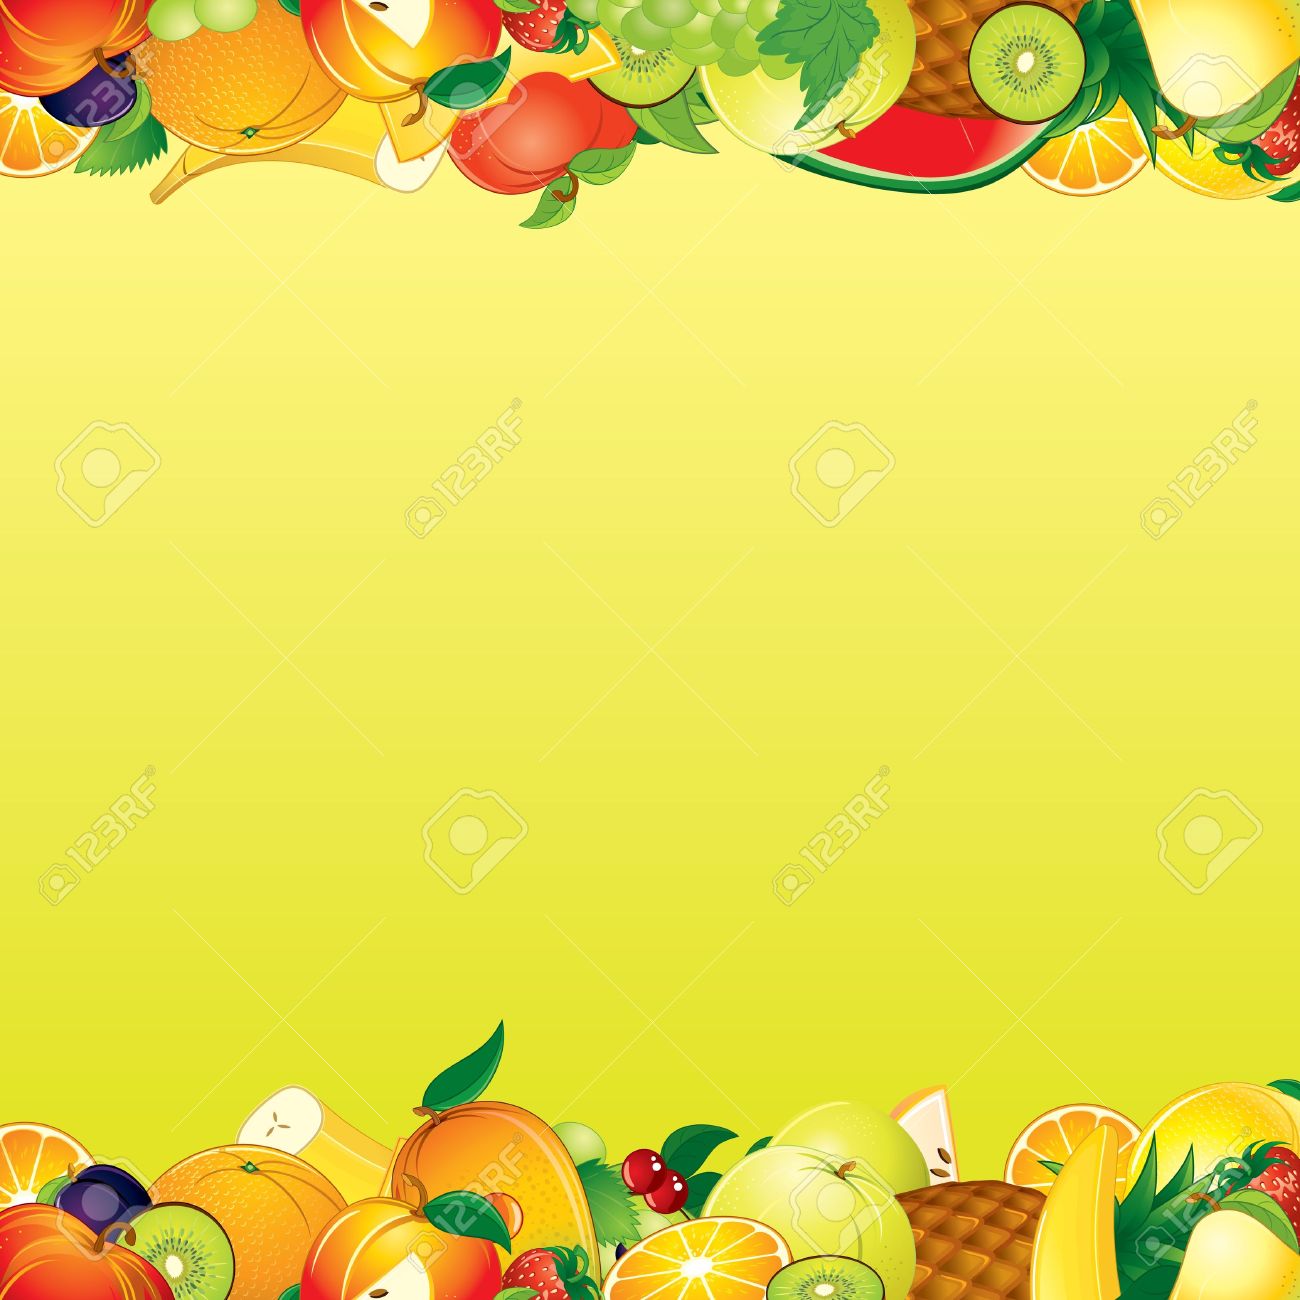 fruits and vegetables clipart background